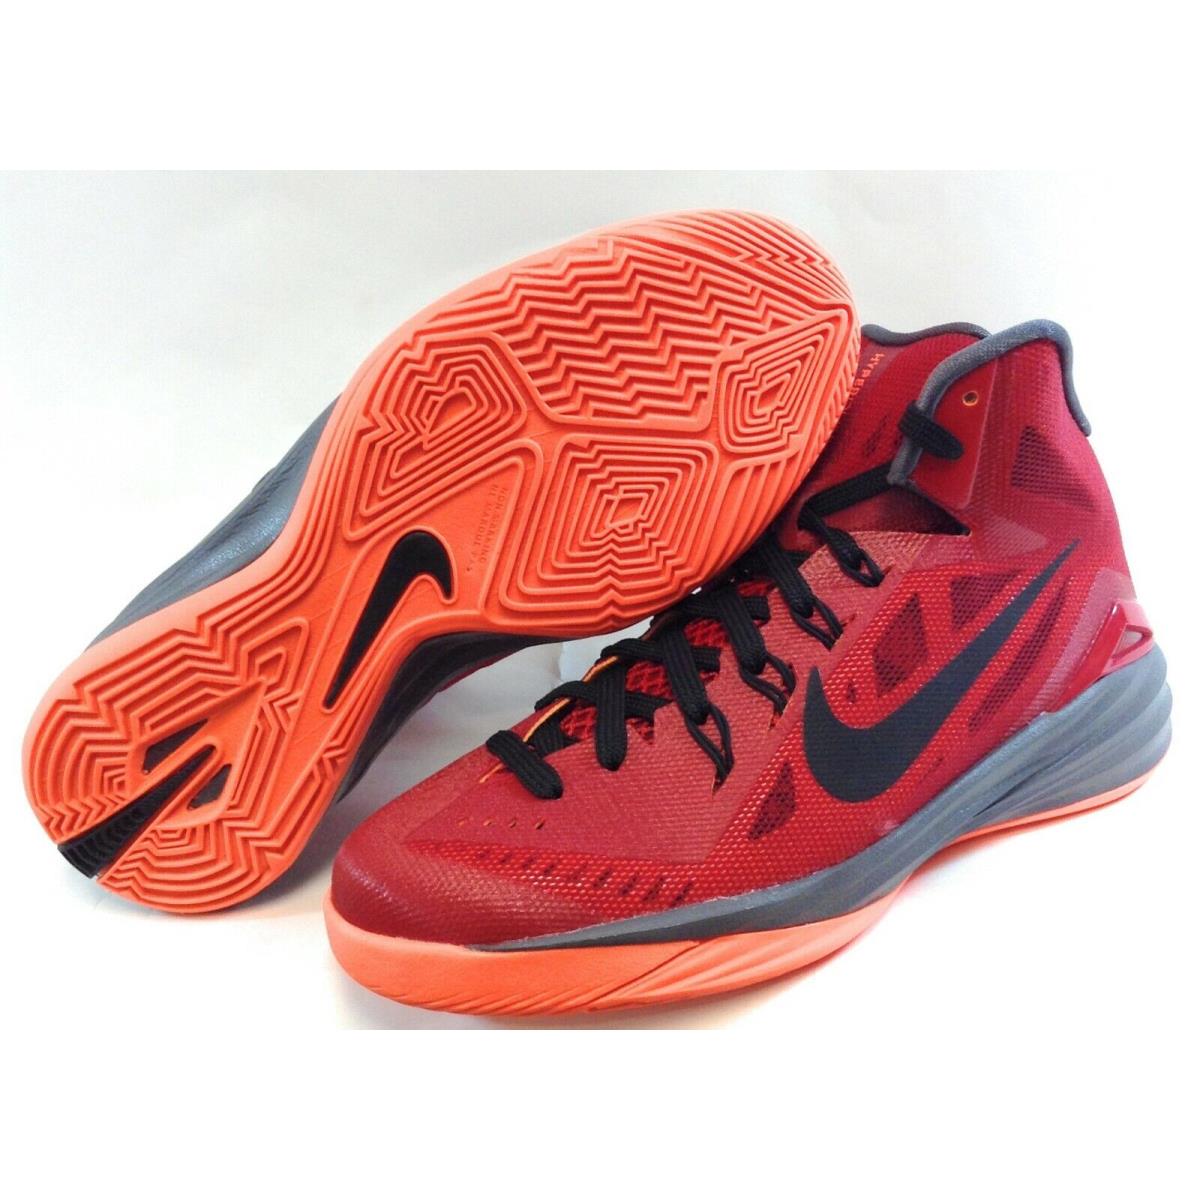 Boys Girls Kids Youth Nike Hyperdunk 2014 654252 600 Red DS Sneakers Shoes - Red